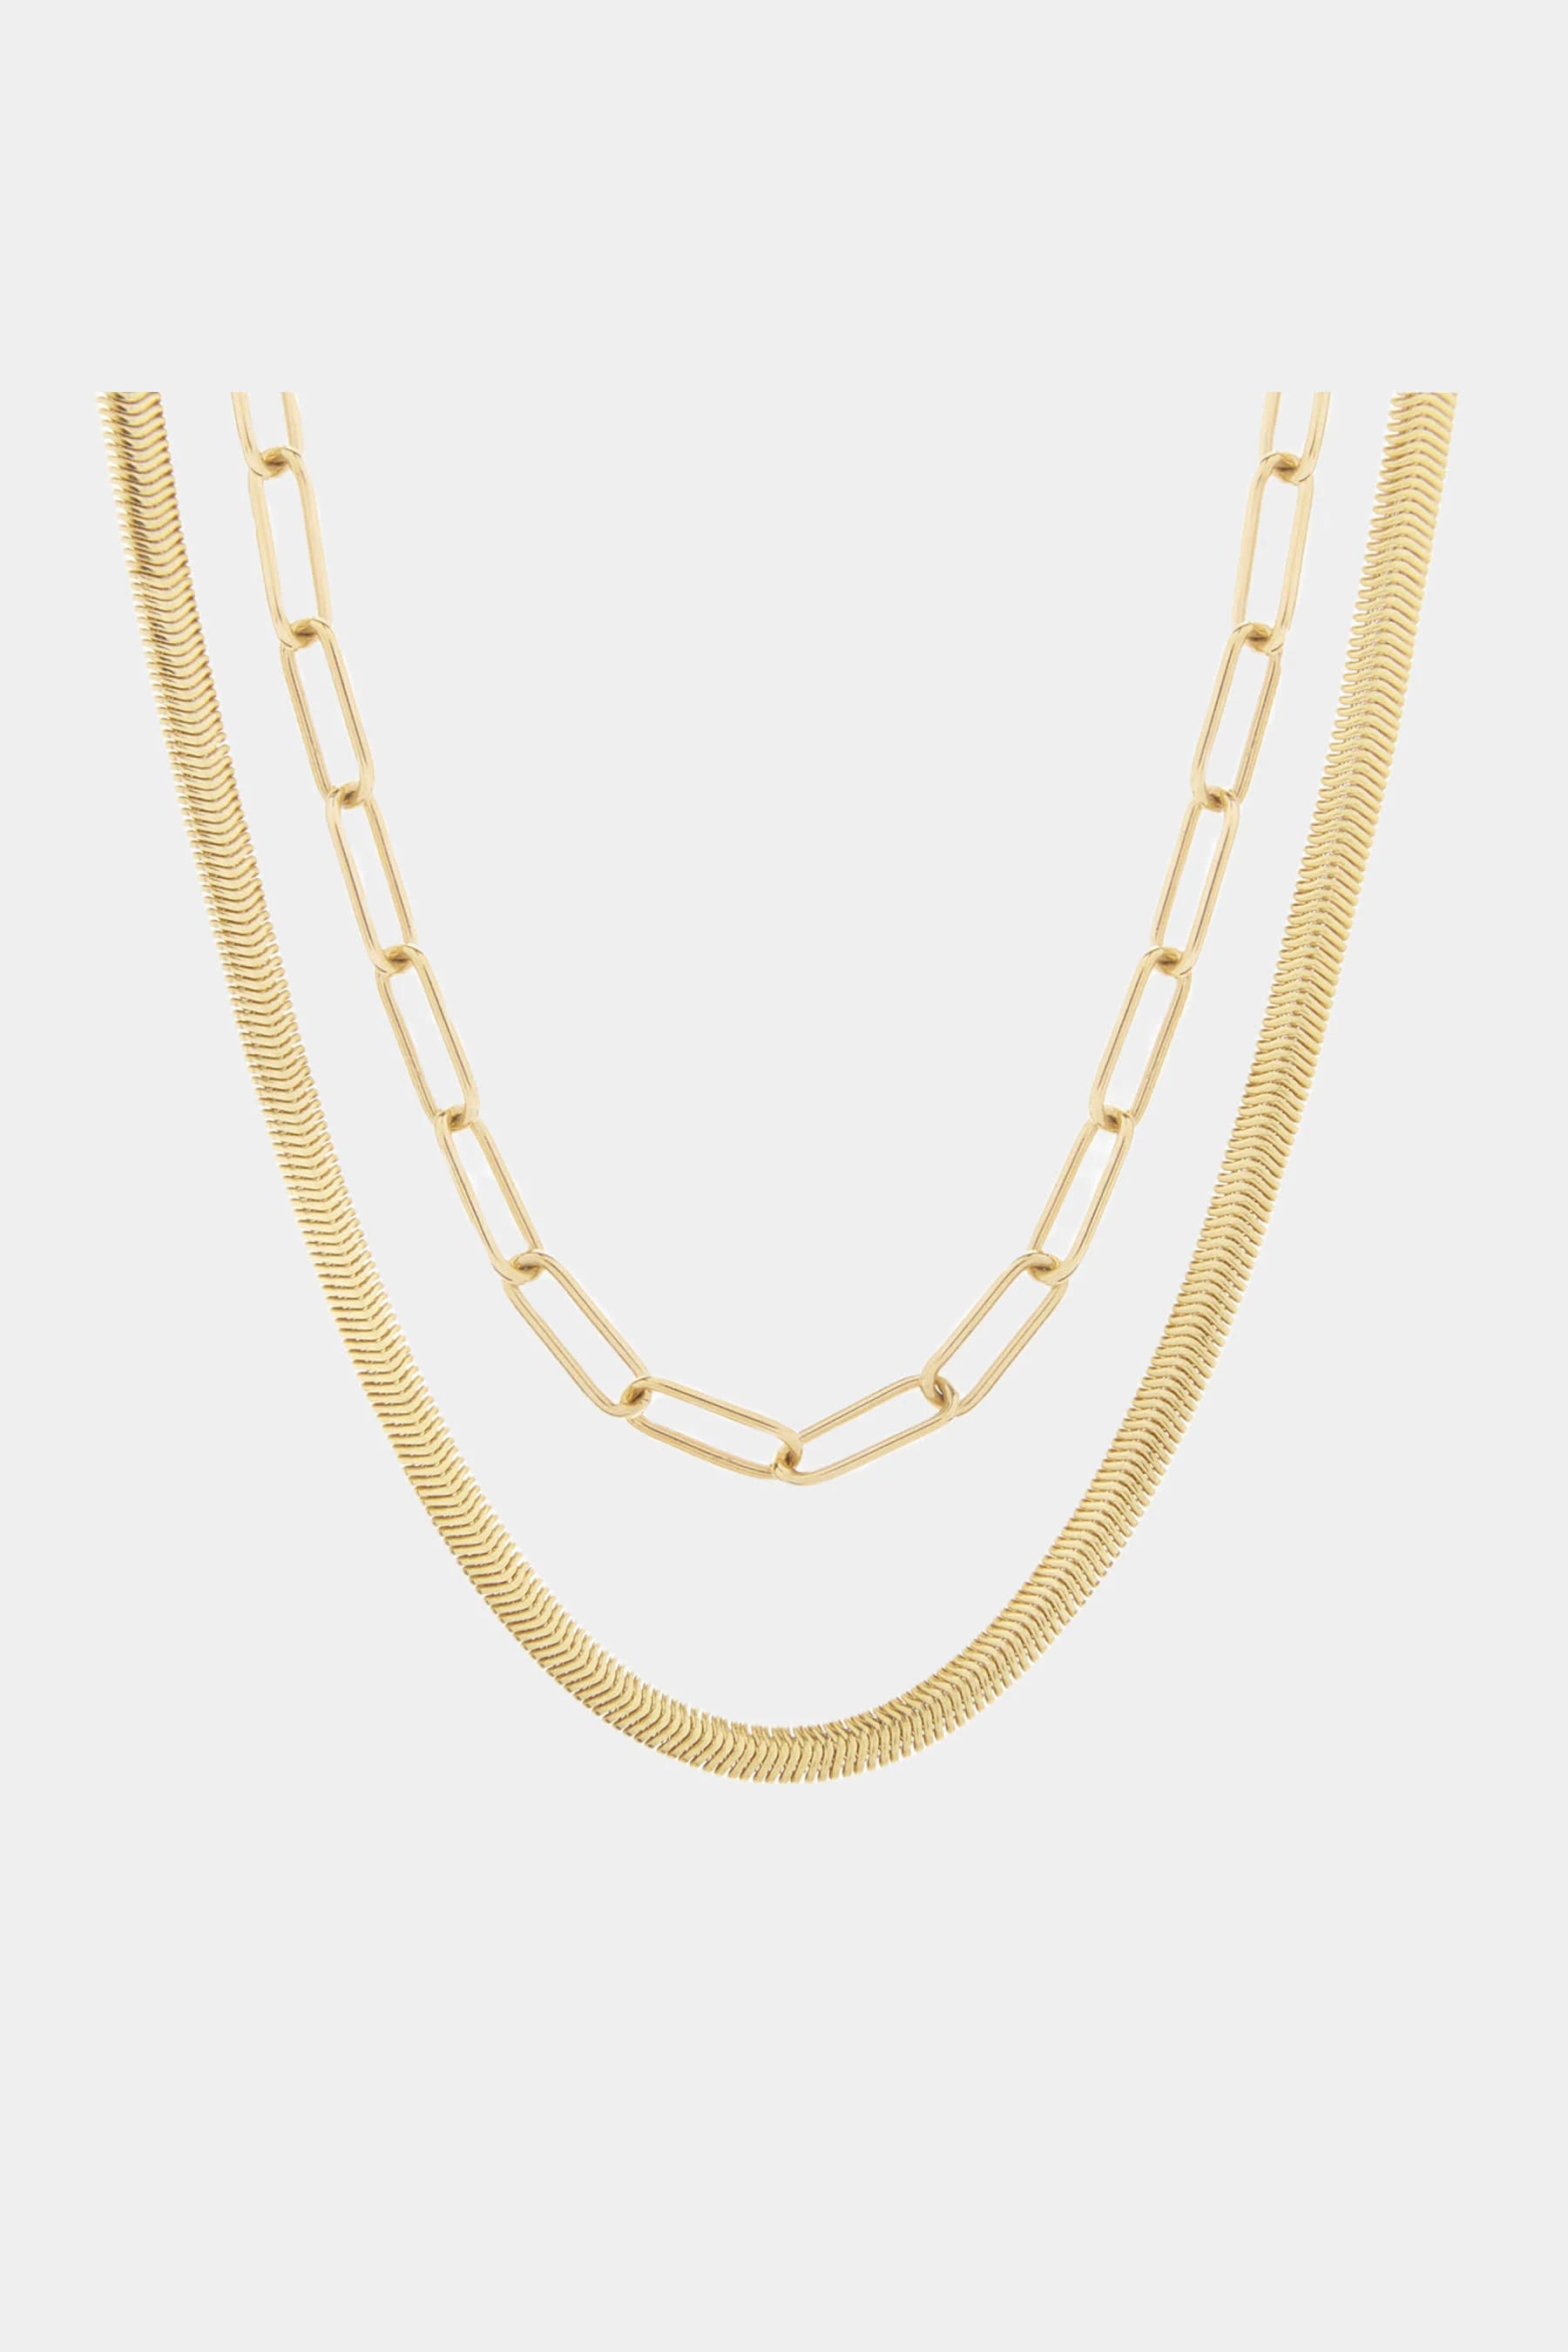 Delicate Gold Layering Necklace Set from Brook & York | Image